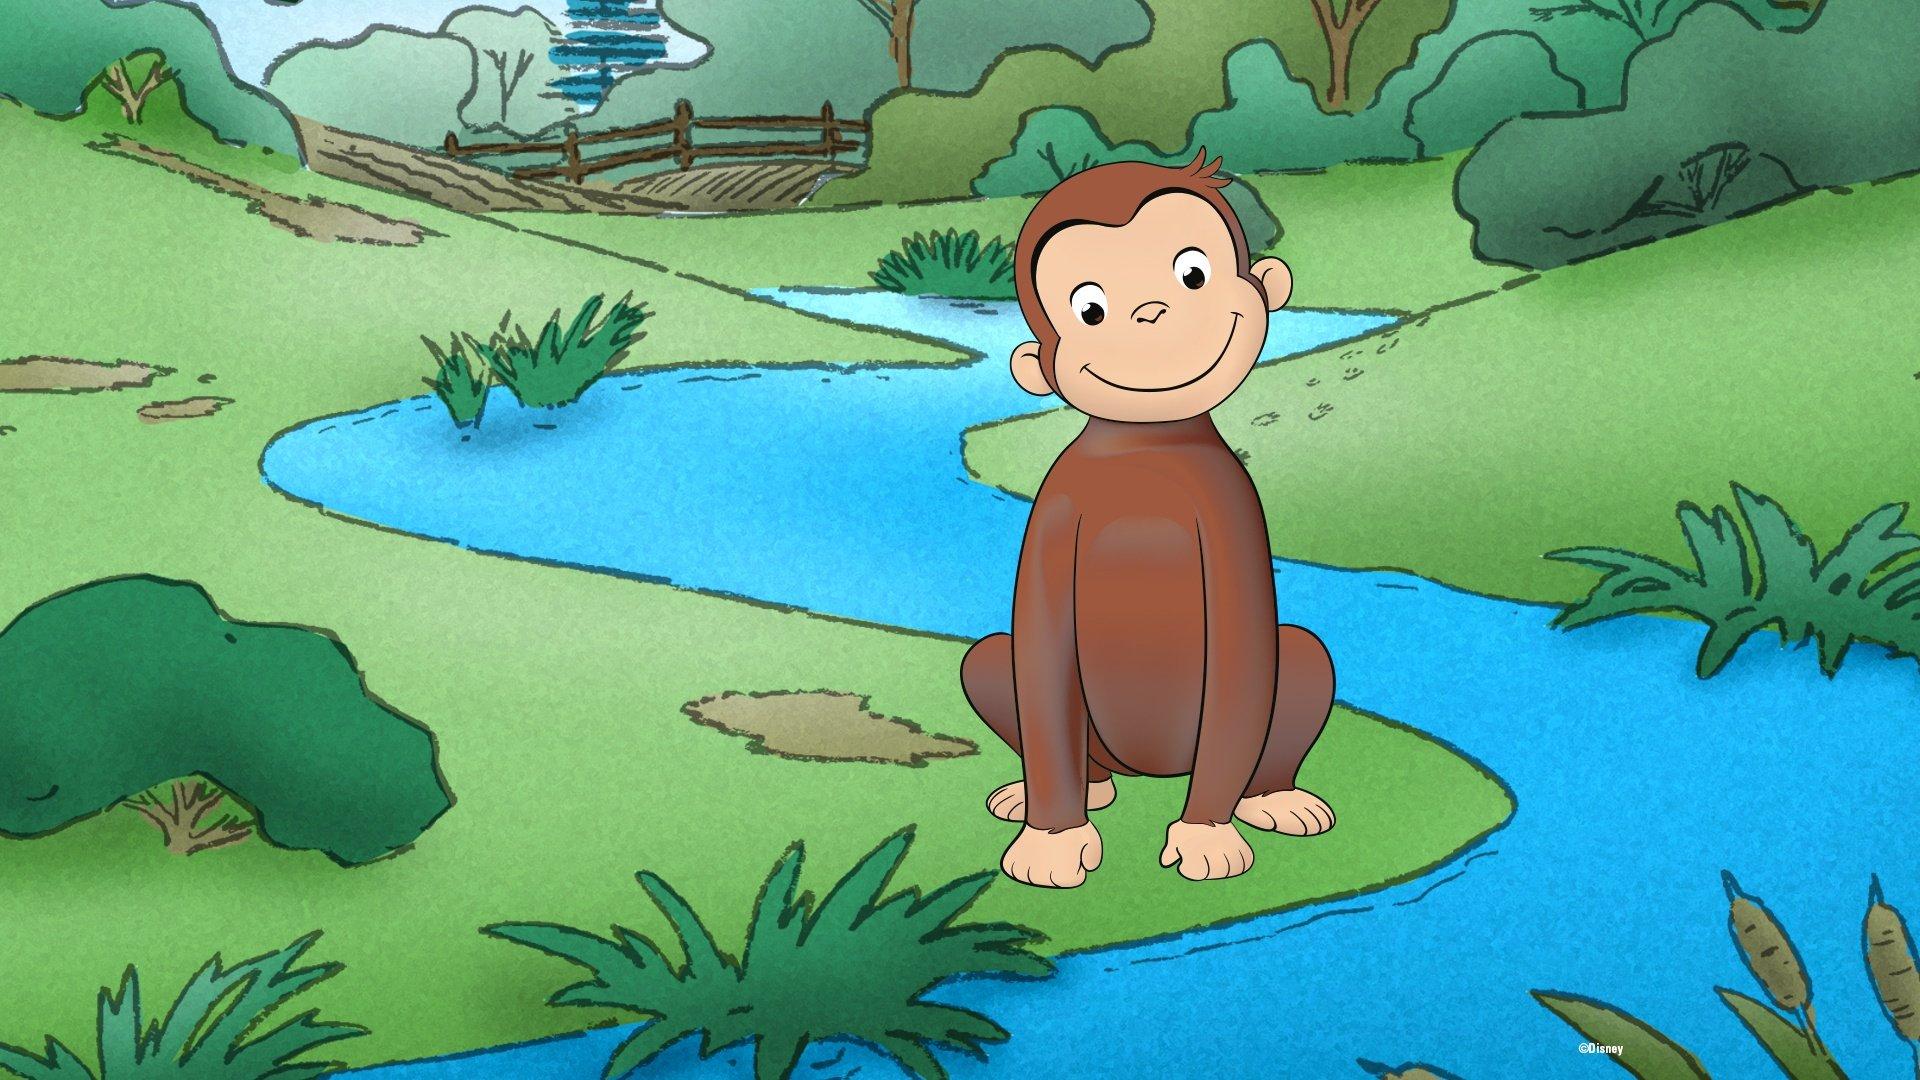 Curioso come George - Stag. 7 Ep. 6